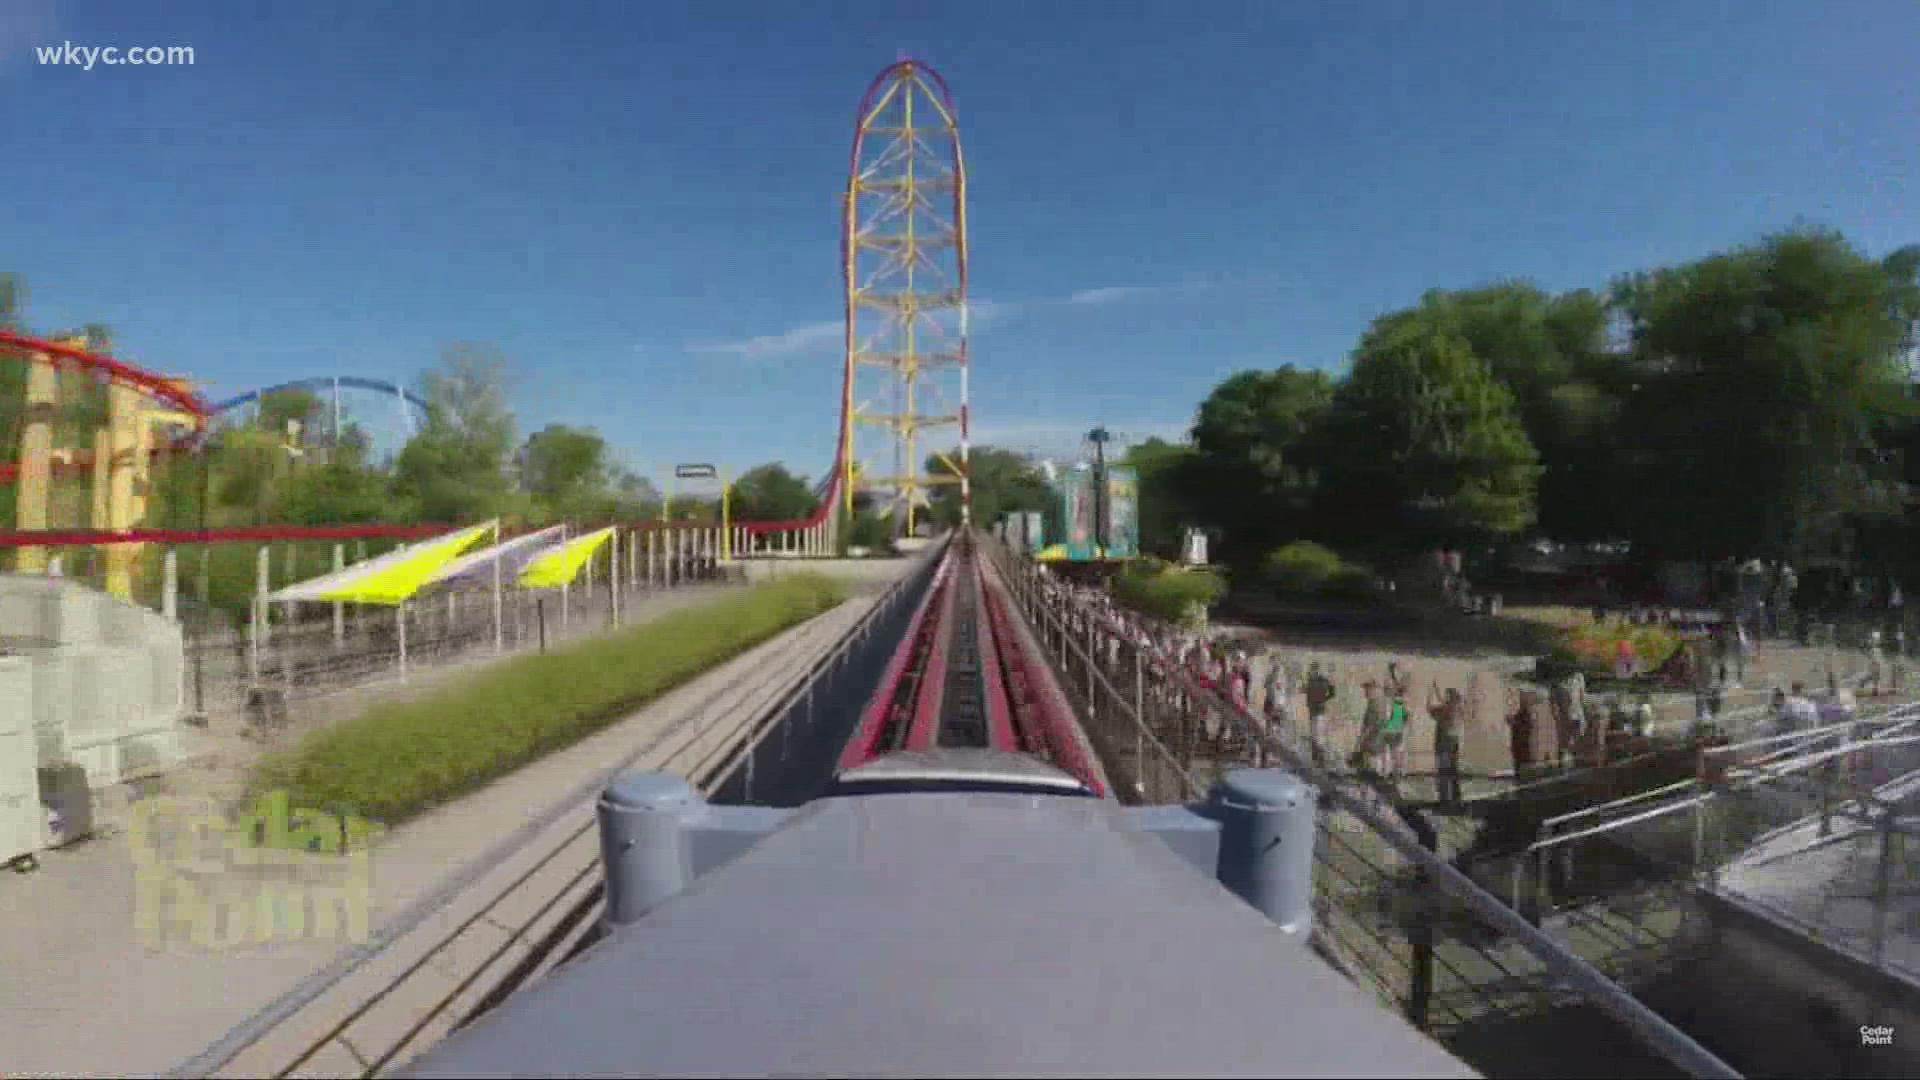 In 2004, one Cedar Point guest reported being injured after riding the newly debuted Top Thrill Dragster. Now, she says the ride needs to be shut down.